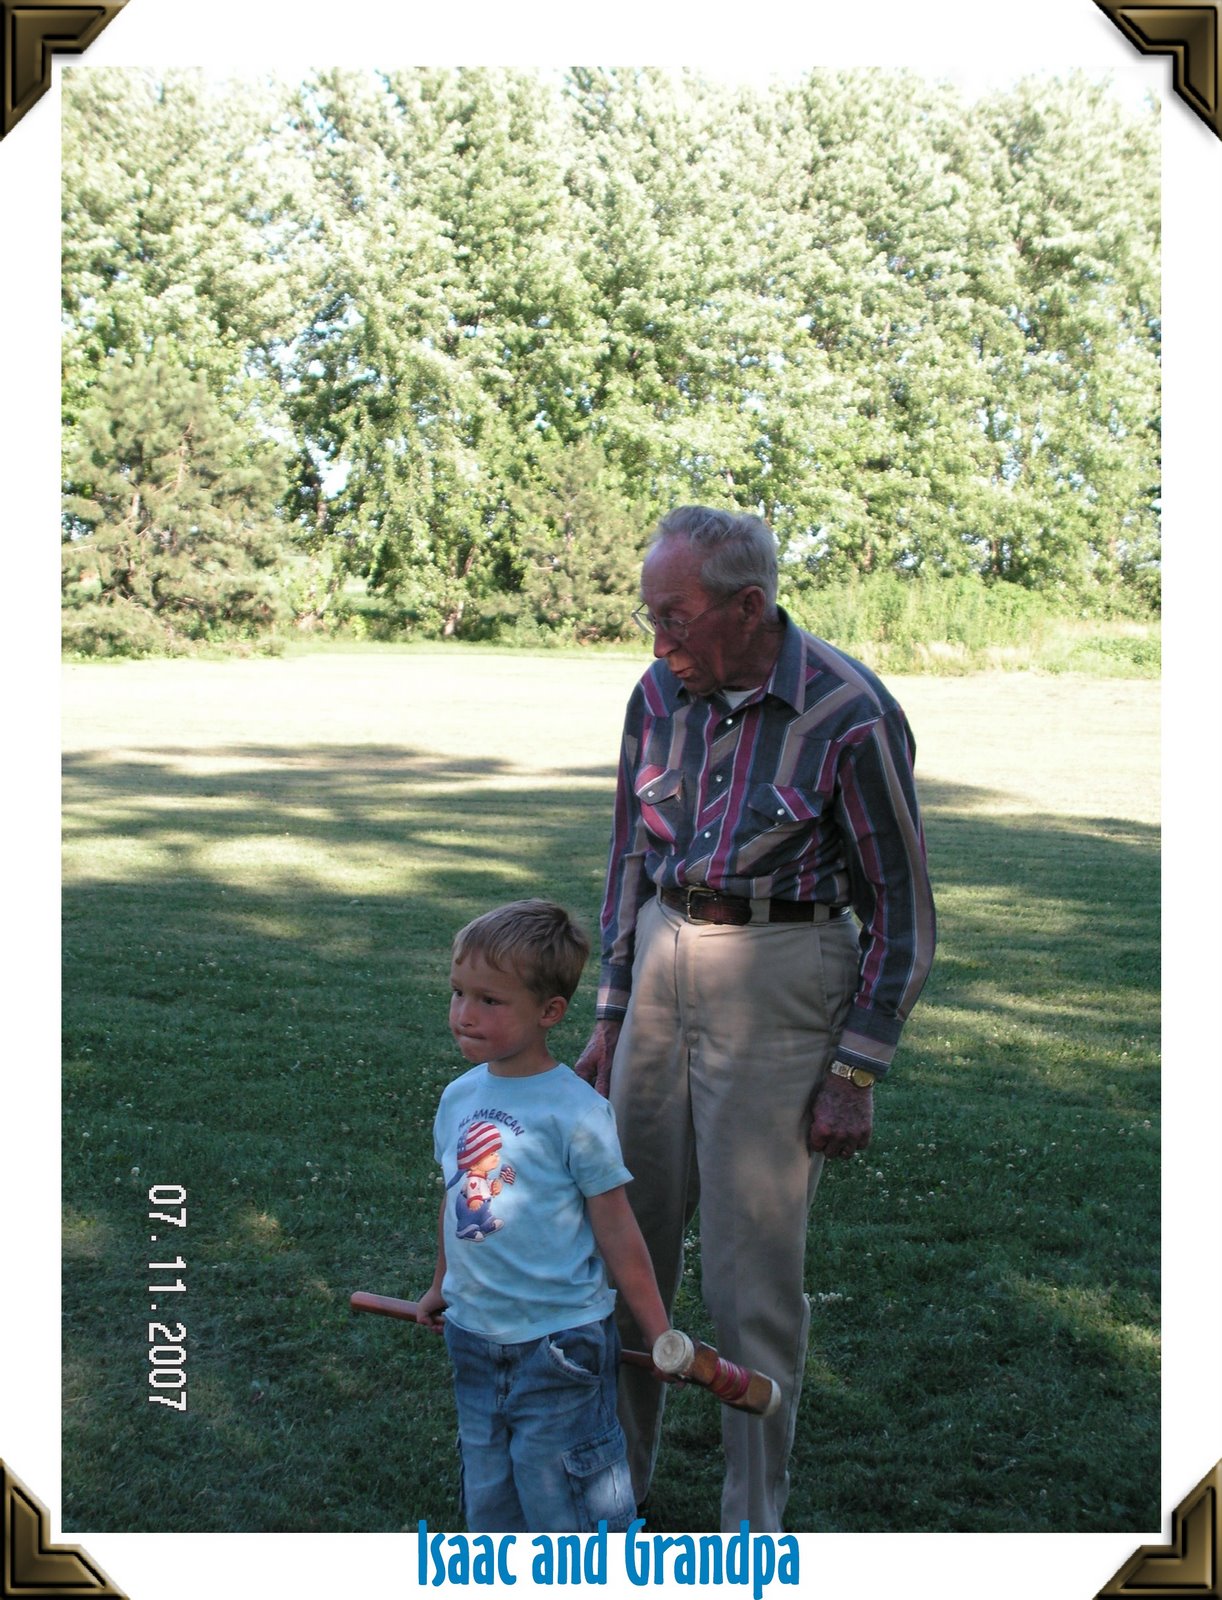 [isaac+and+grandpa+playing+kroque.jpg]